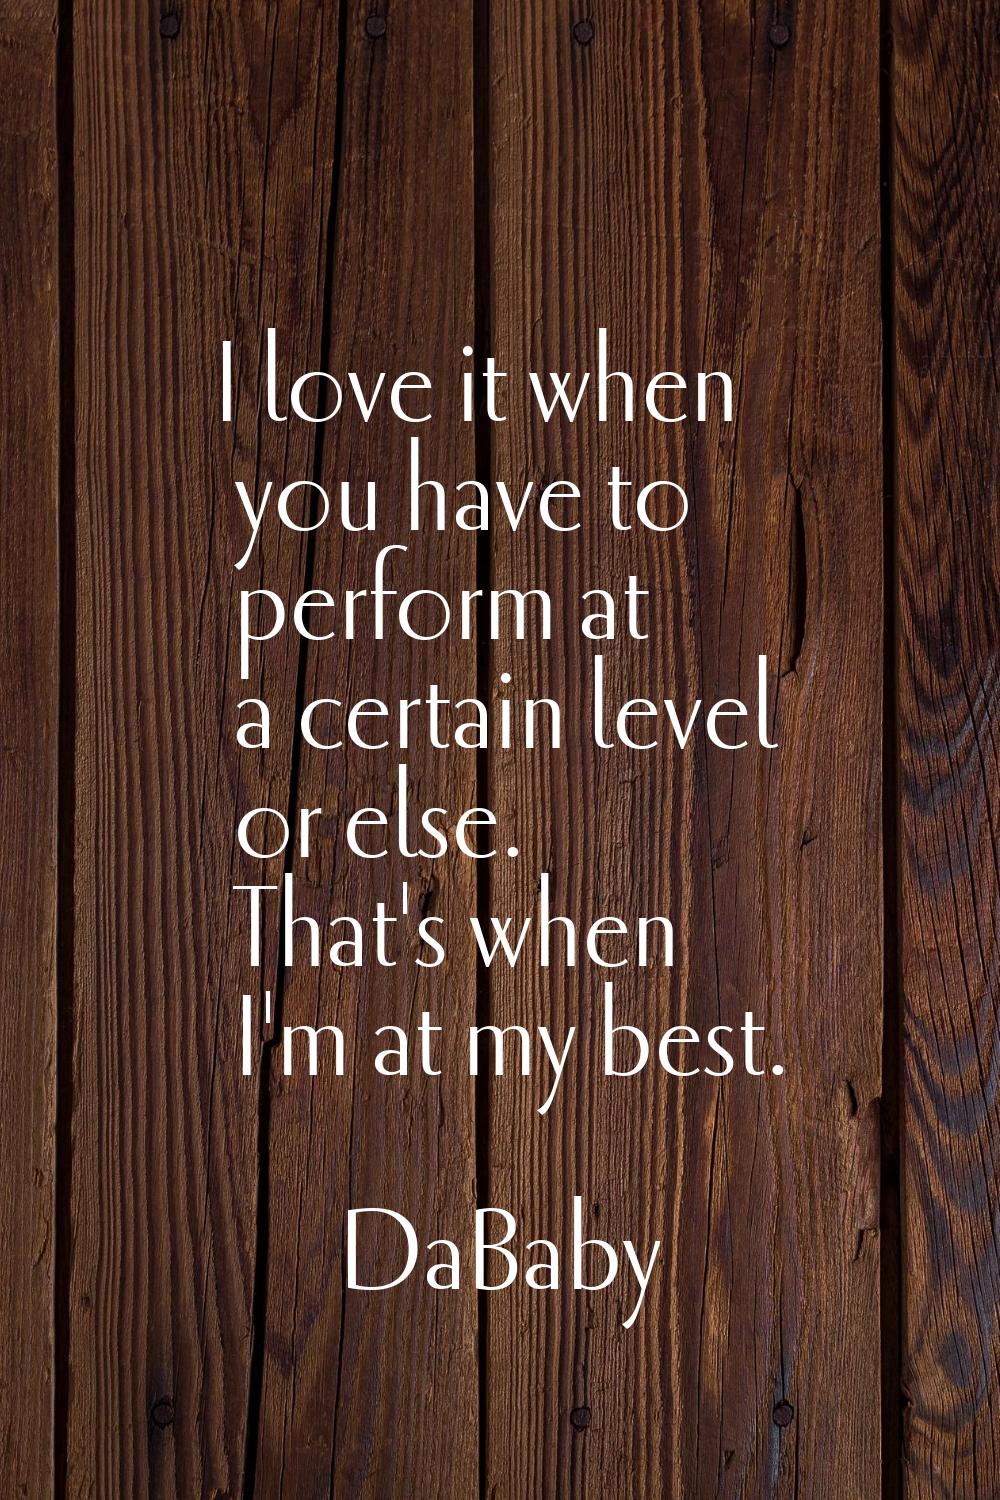 I love it when you have to perform at a certain level or else. That's when I'm at my best.